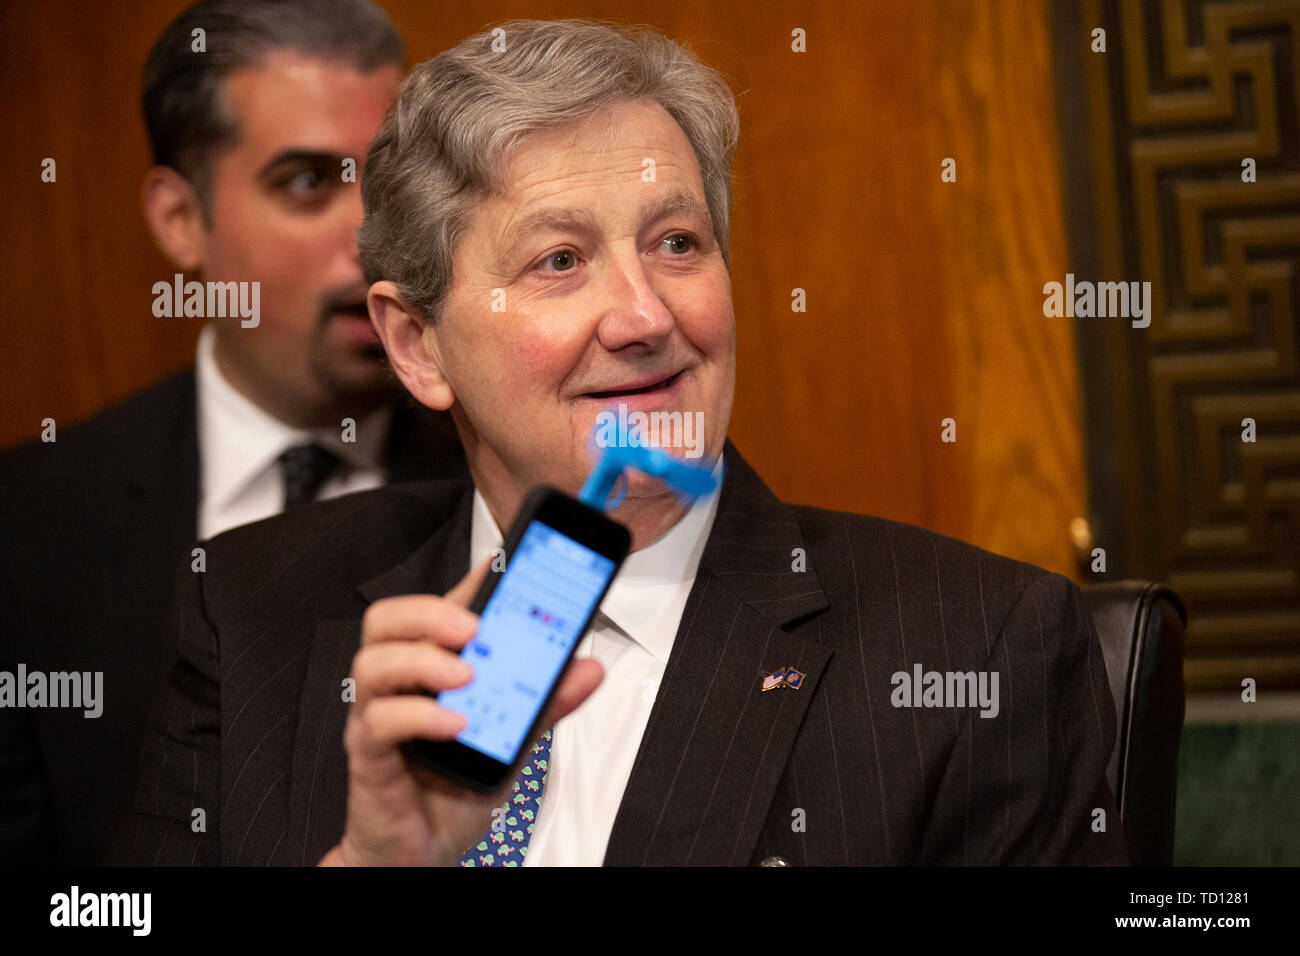 Washington DC, USA. 11th June, 2019. United States Senator John Kennedy (Republican of Louisiana) shows off a phone-fan prior to the testimony of Acting Secretary of the United States Department of Homeland Security Kevin McAleenan before the U.S. Senate Judiciary Committee on Capitol Hill in Washington, DC, U.S. on June 11, 2019. Credit: MediaPunch Inc/Alamy Live News Stock Photo